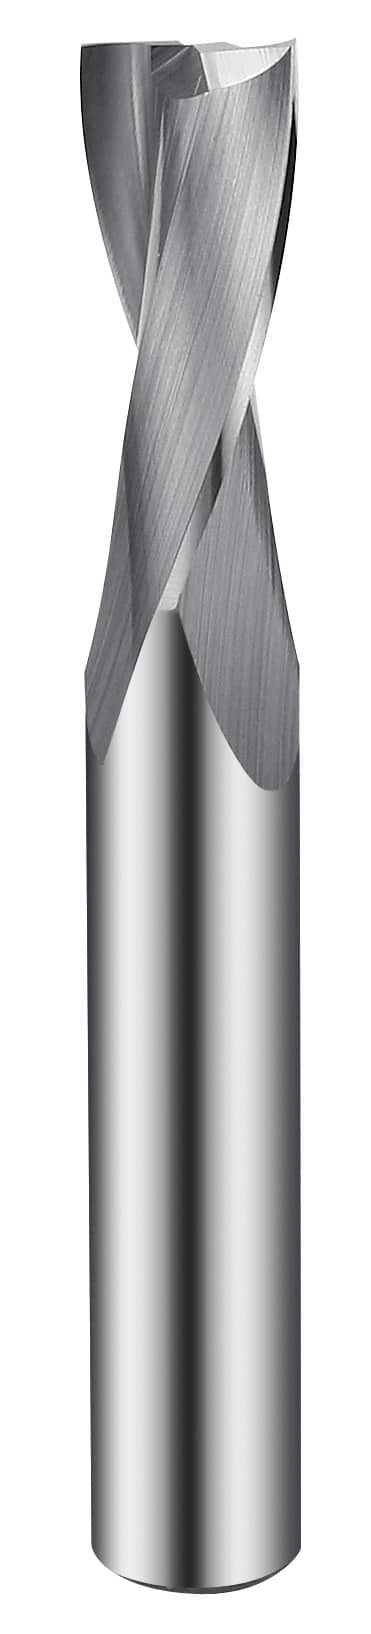 Carbide End Mill for Acrylic